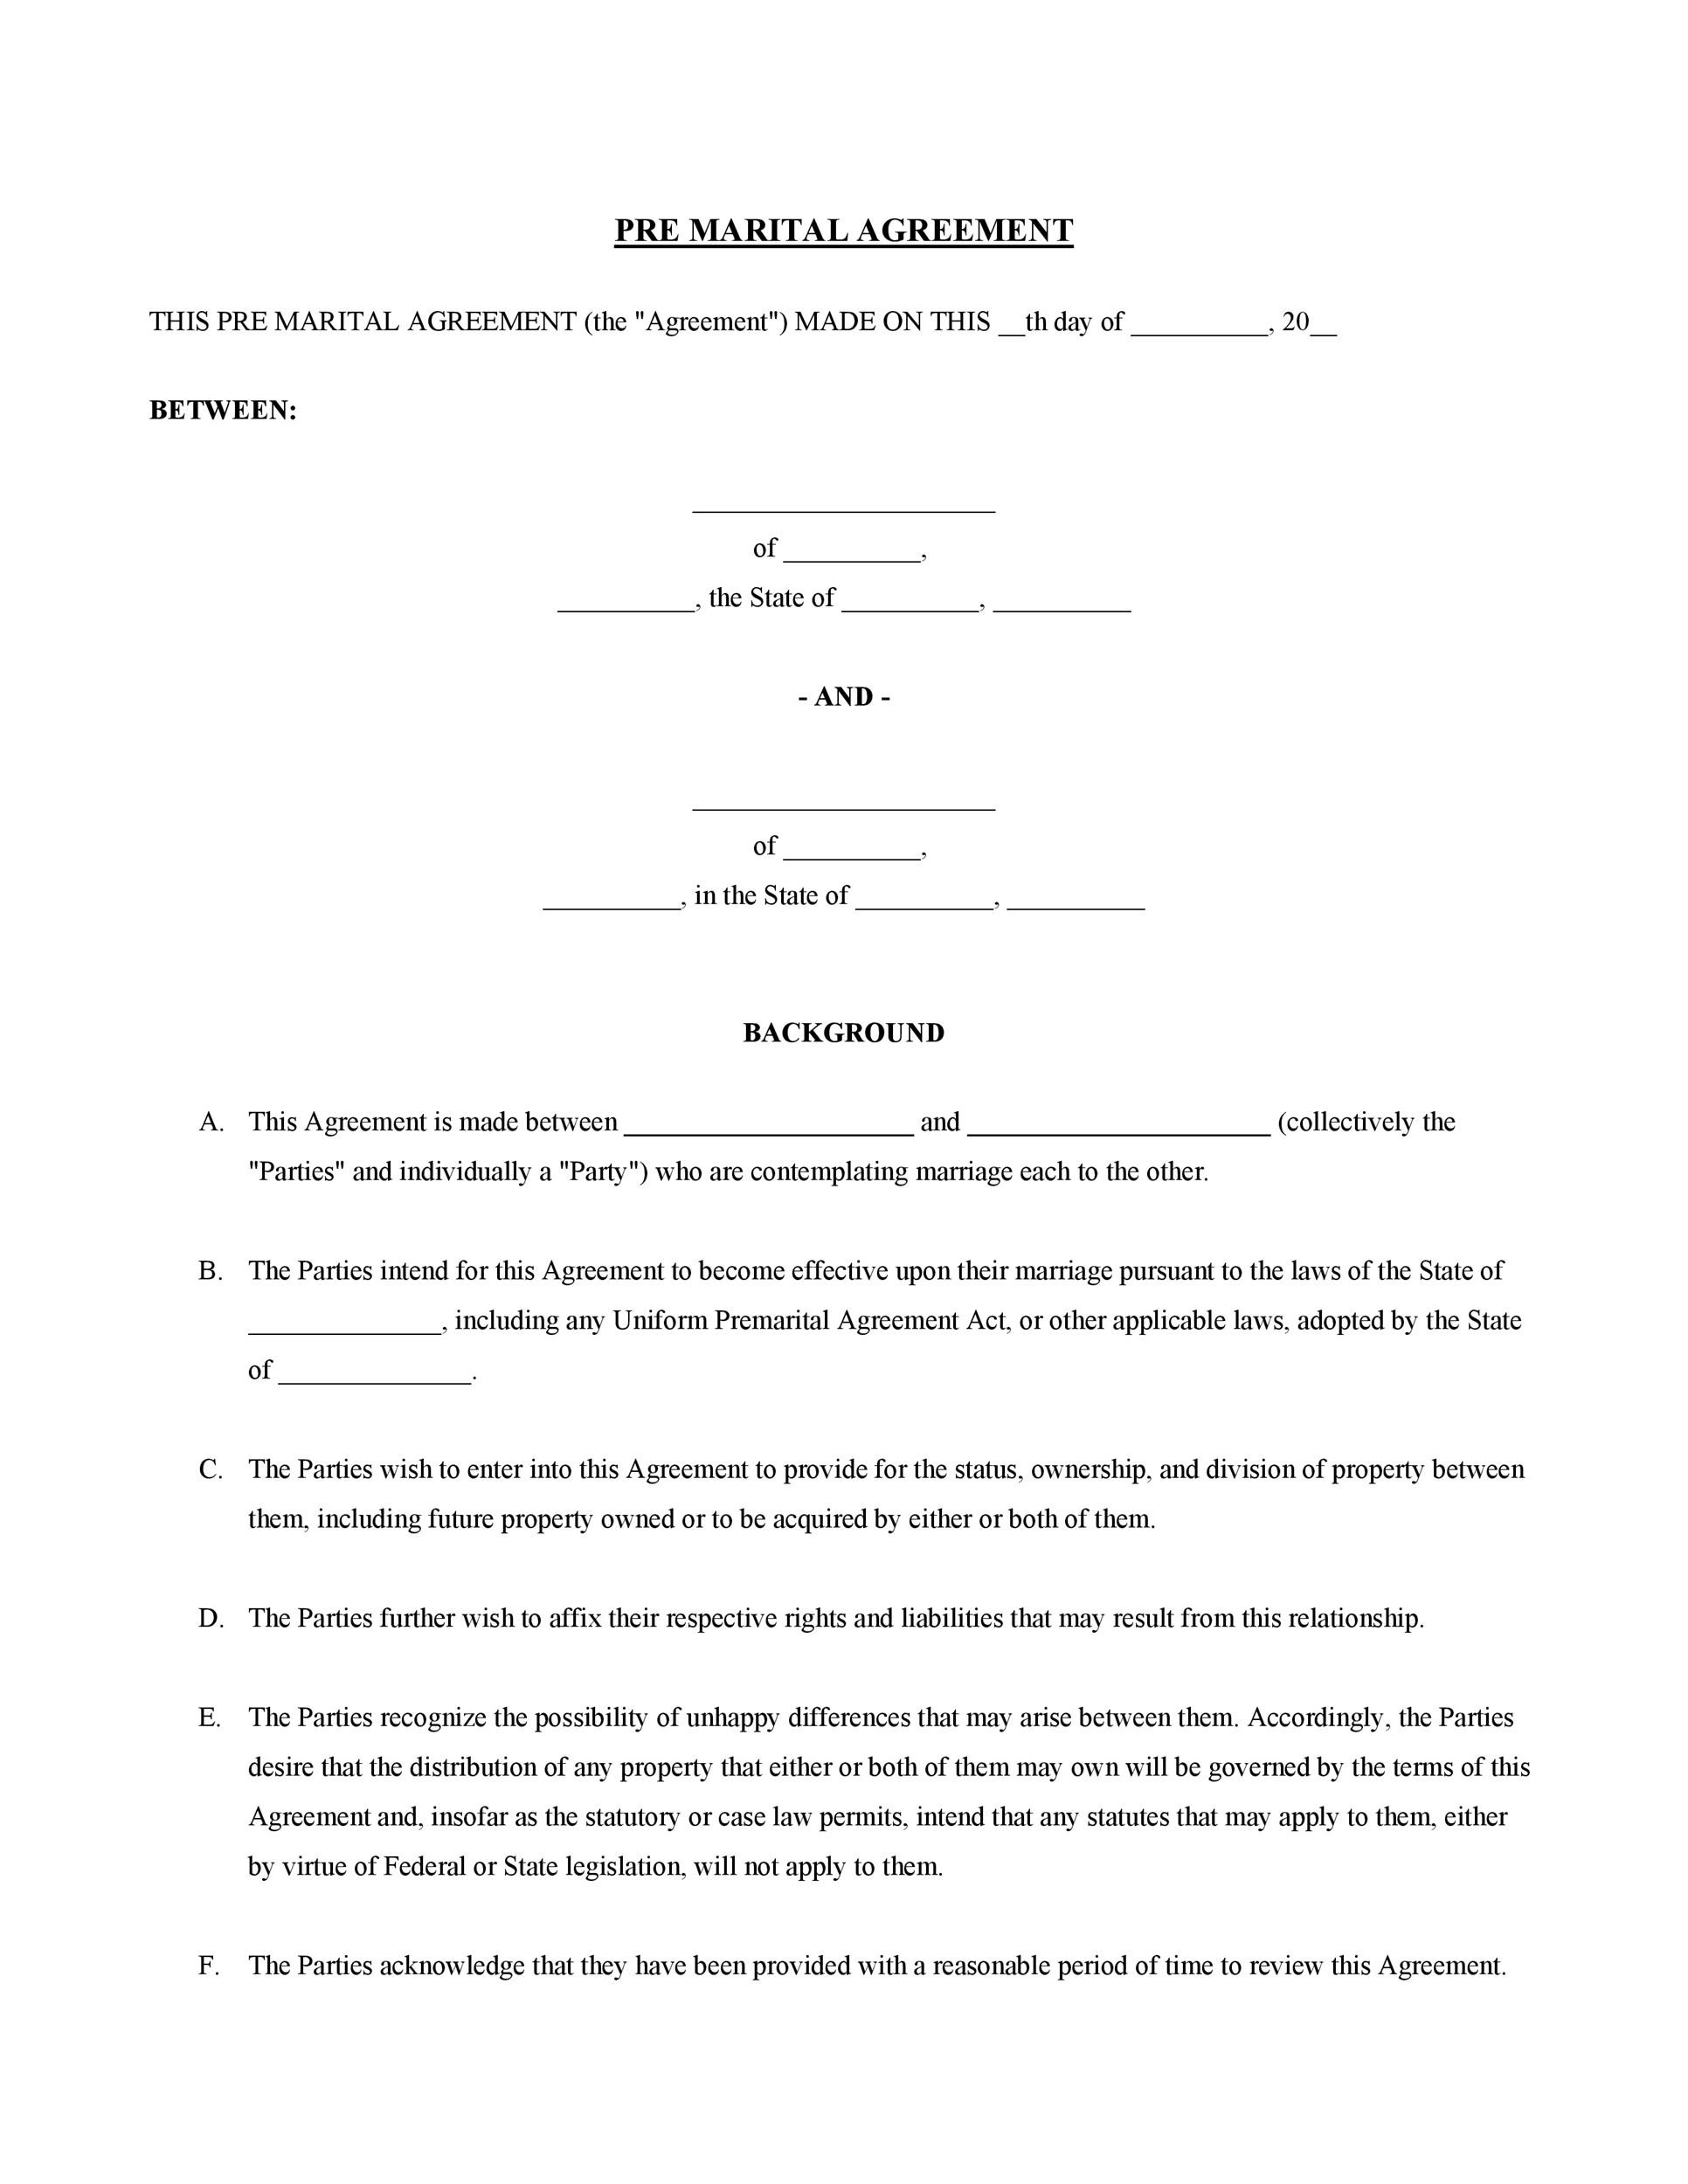 Cohabitation Agreement Template Free from templatelab.com